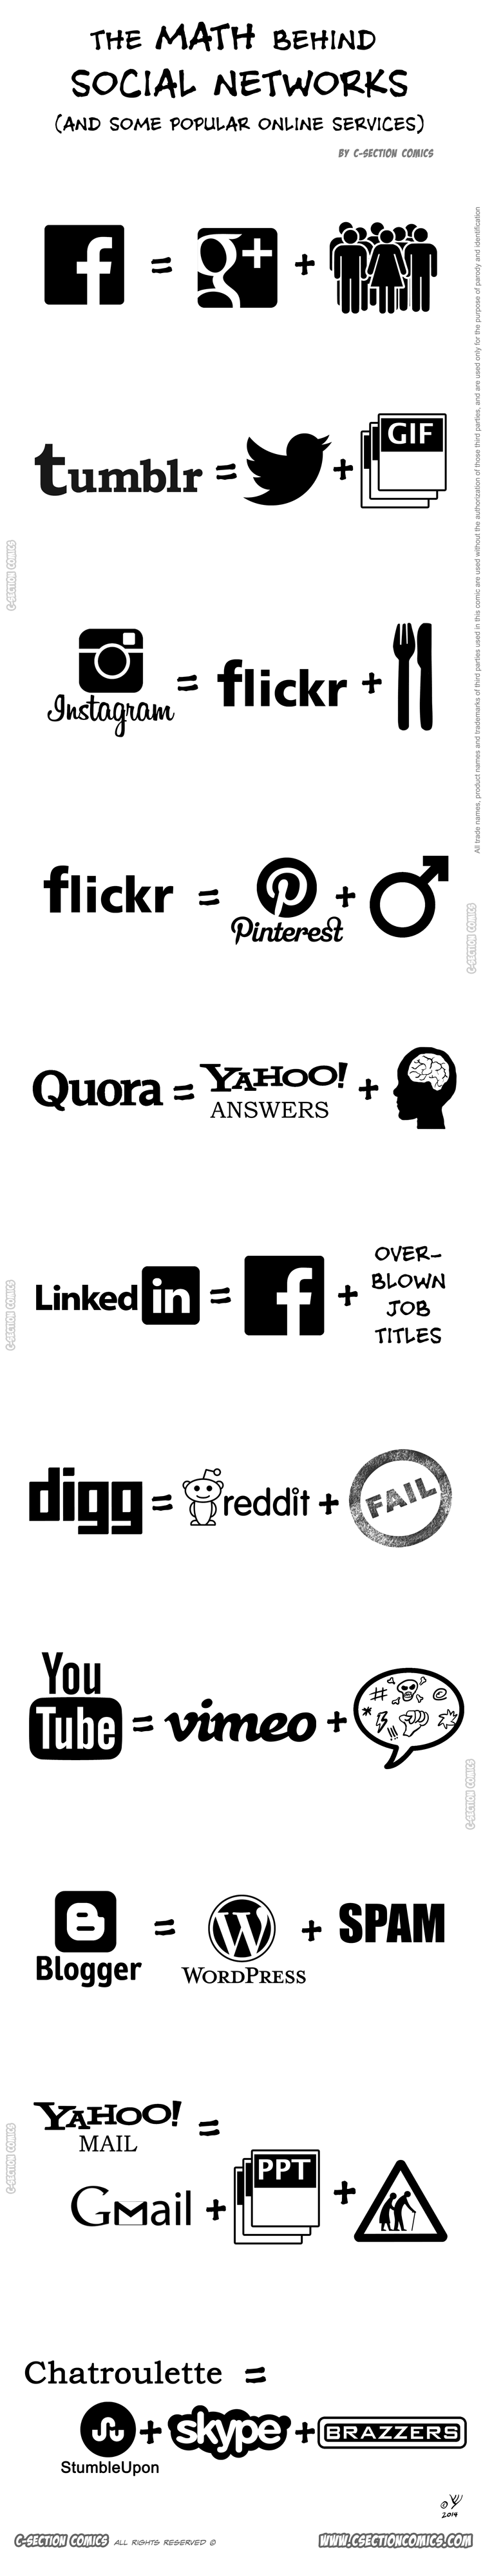 The Math Behind Social Networks - Funny Infographic by C-Section Comics